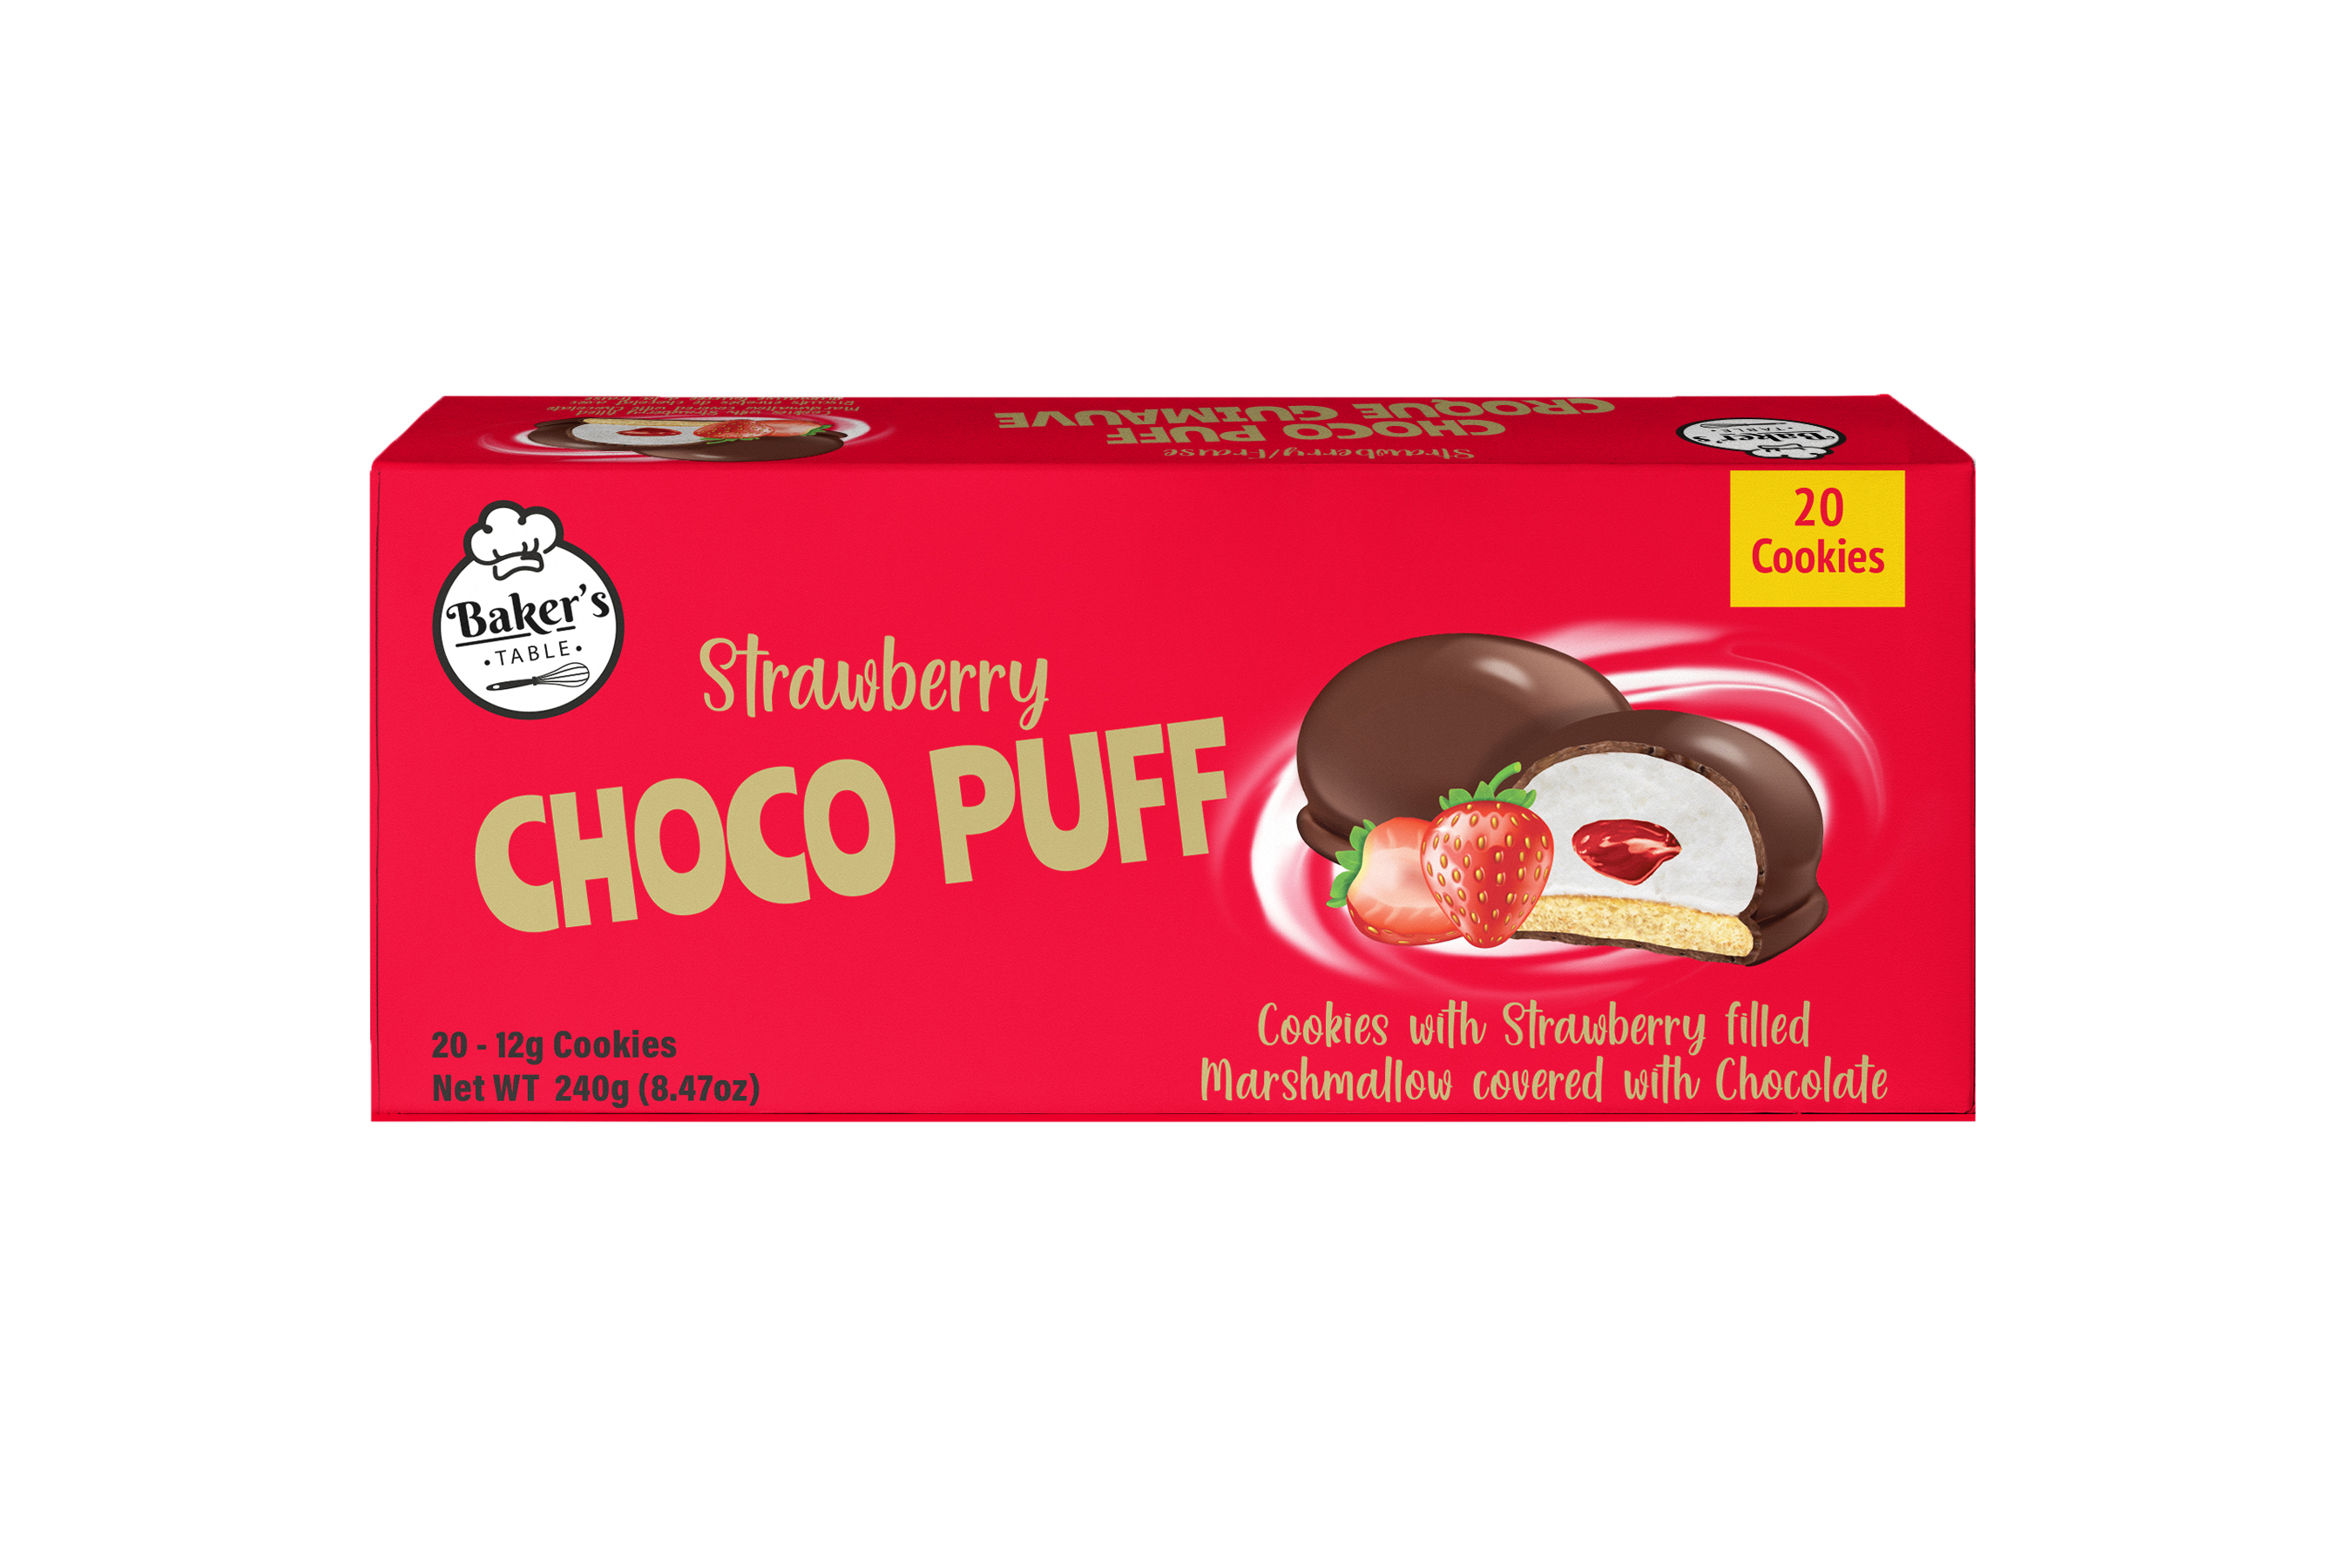 https://exclusivebrands.ca/wp-content/uploads/2021/03/Choco-Puffs-Srawberry.png